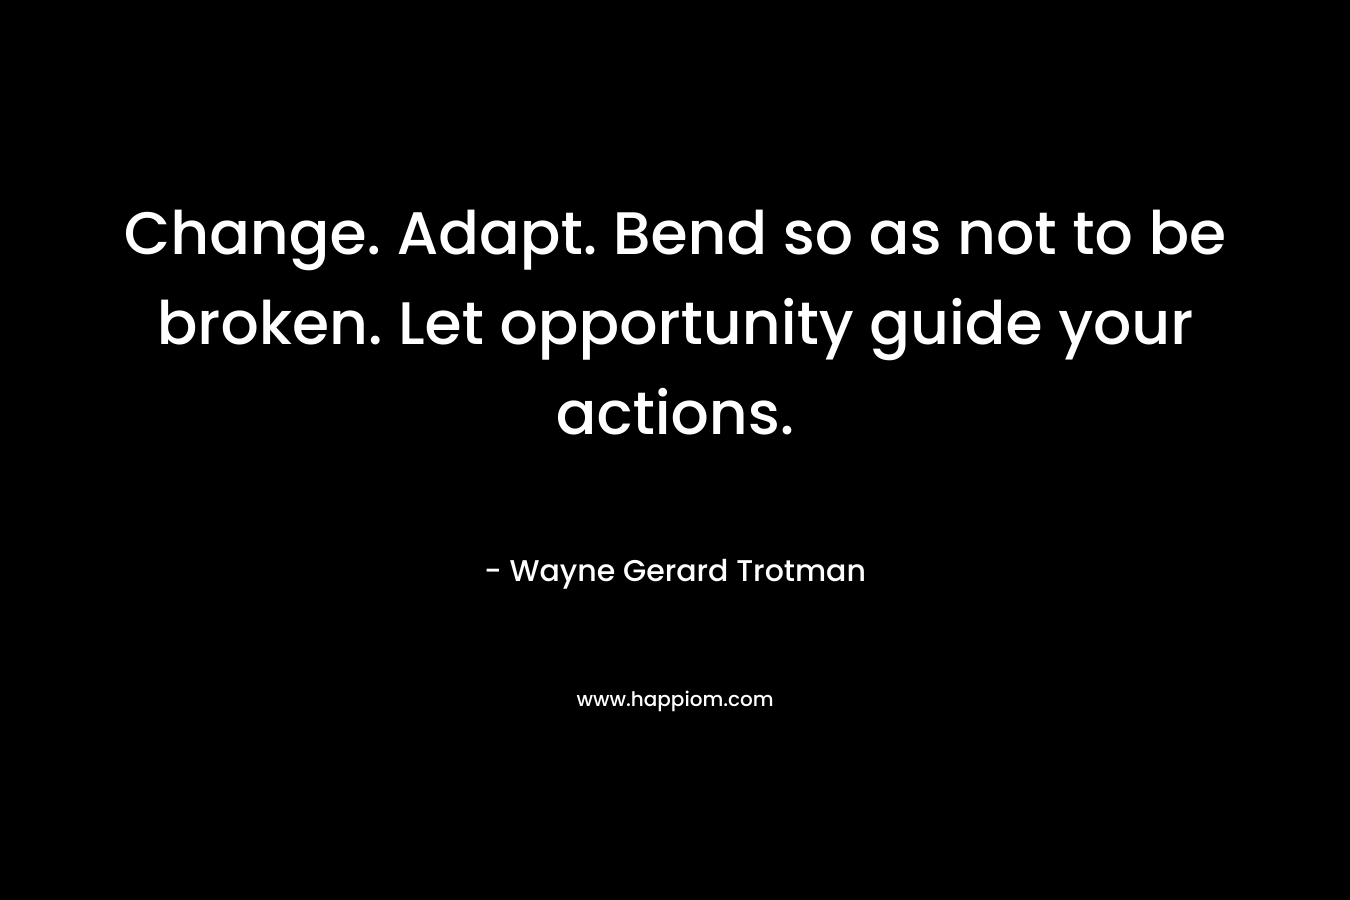 Change. Adapt. Bend so as not to be broken. Let opportunity guide your actions. – Wayne Gerard Trotman